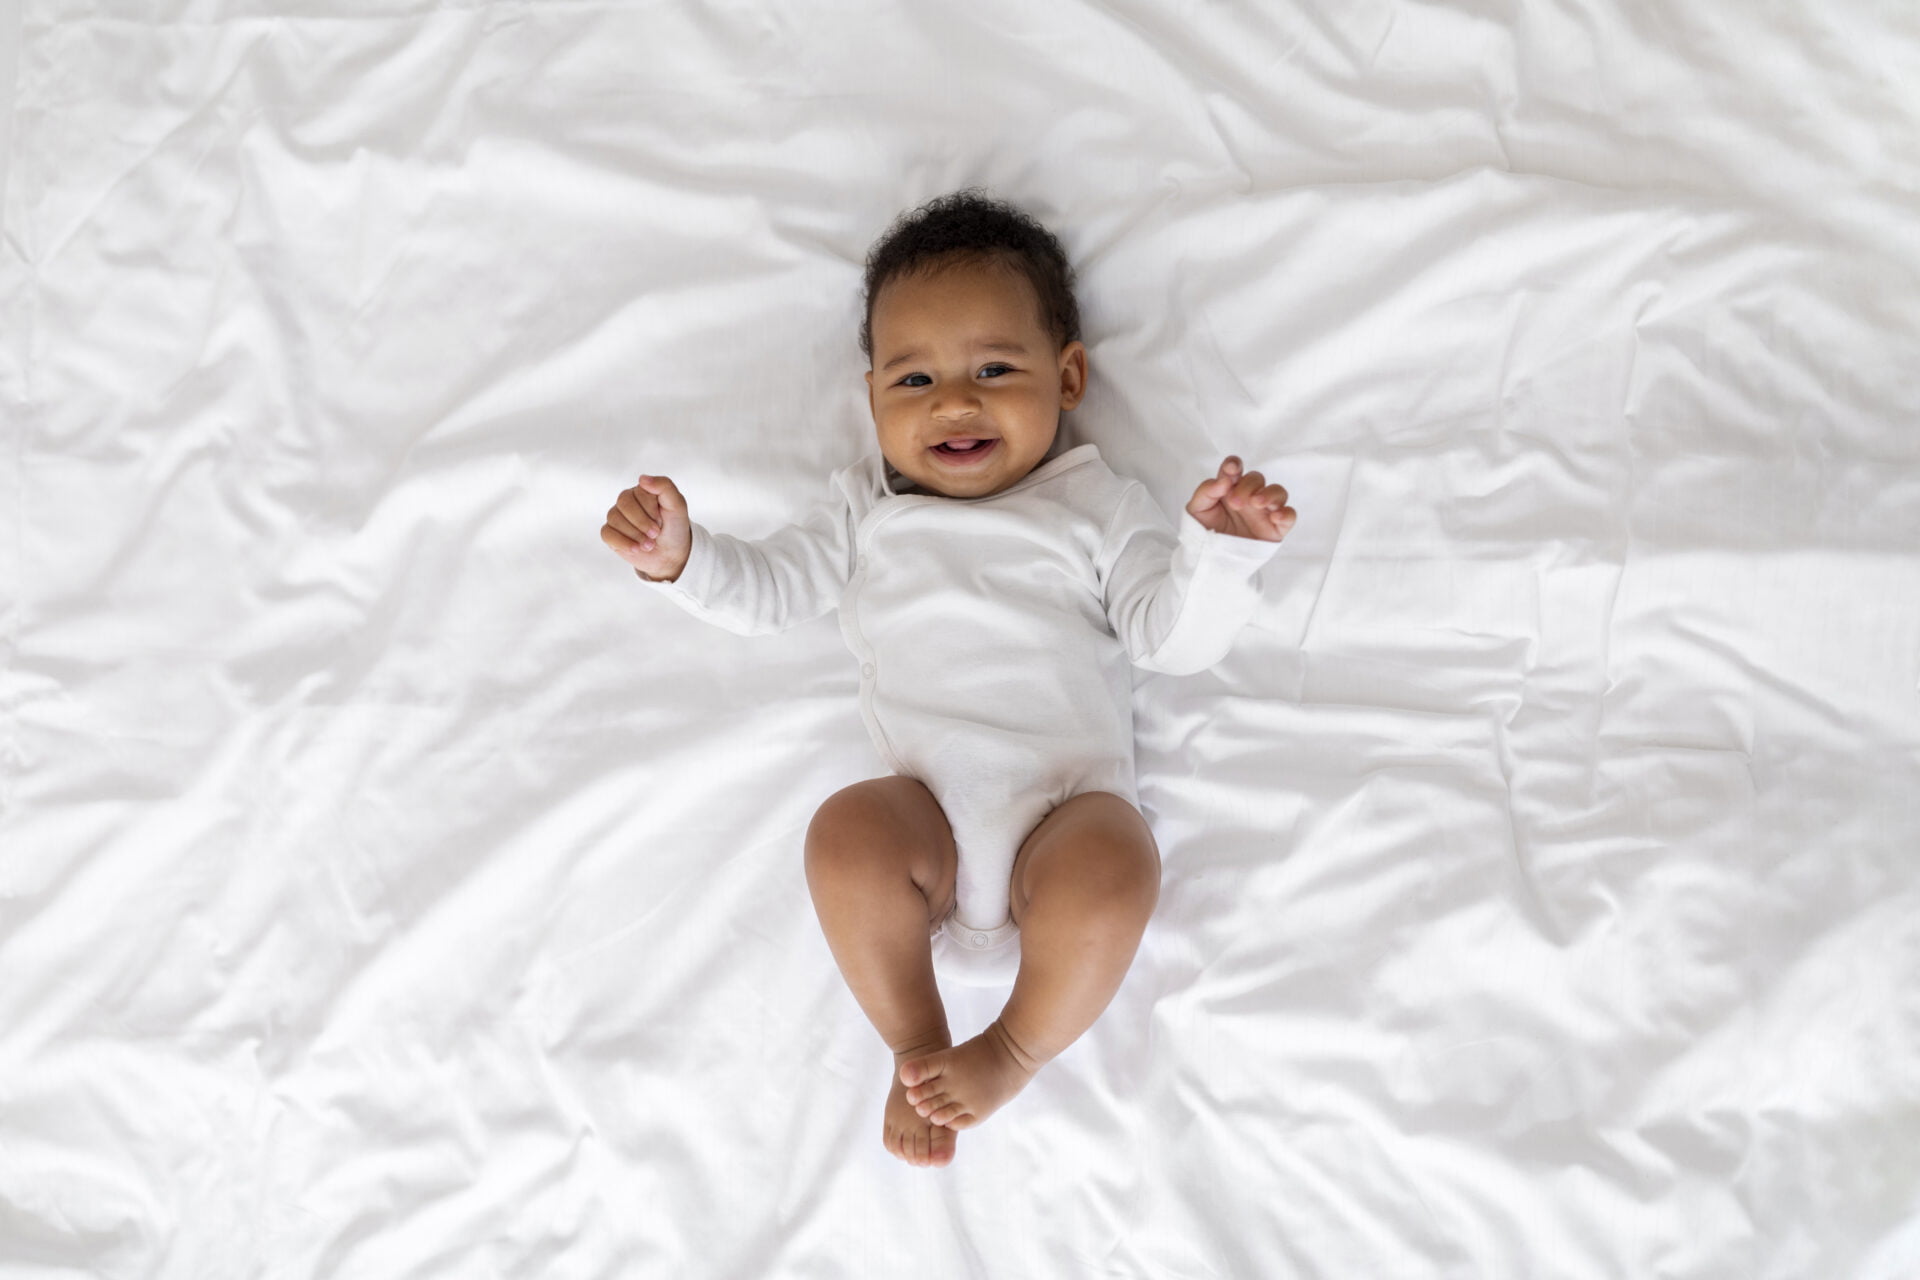 Portrait Of Cute Laughing Black Infant Baby Lying On Bed, Adorable Little African American Child In White Bodysuit Relaxing In Bedroom And Looking At Camera